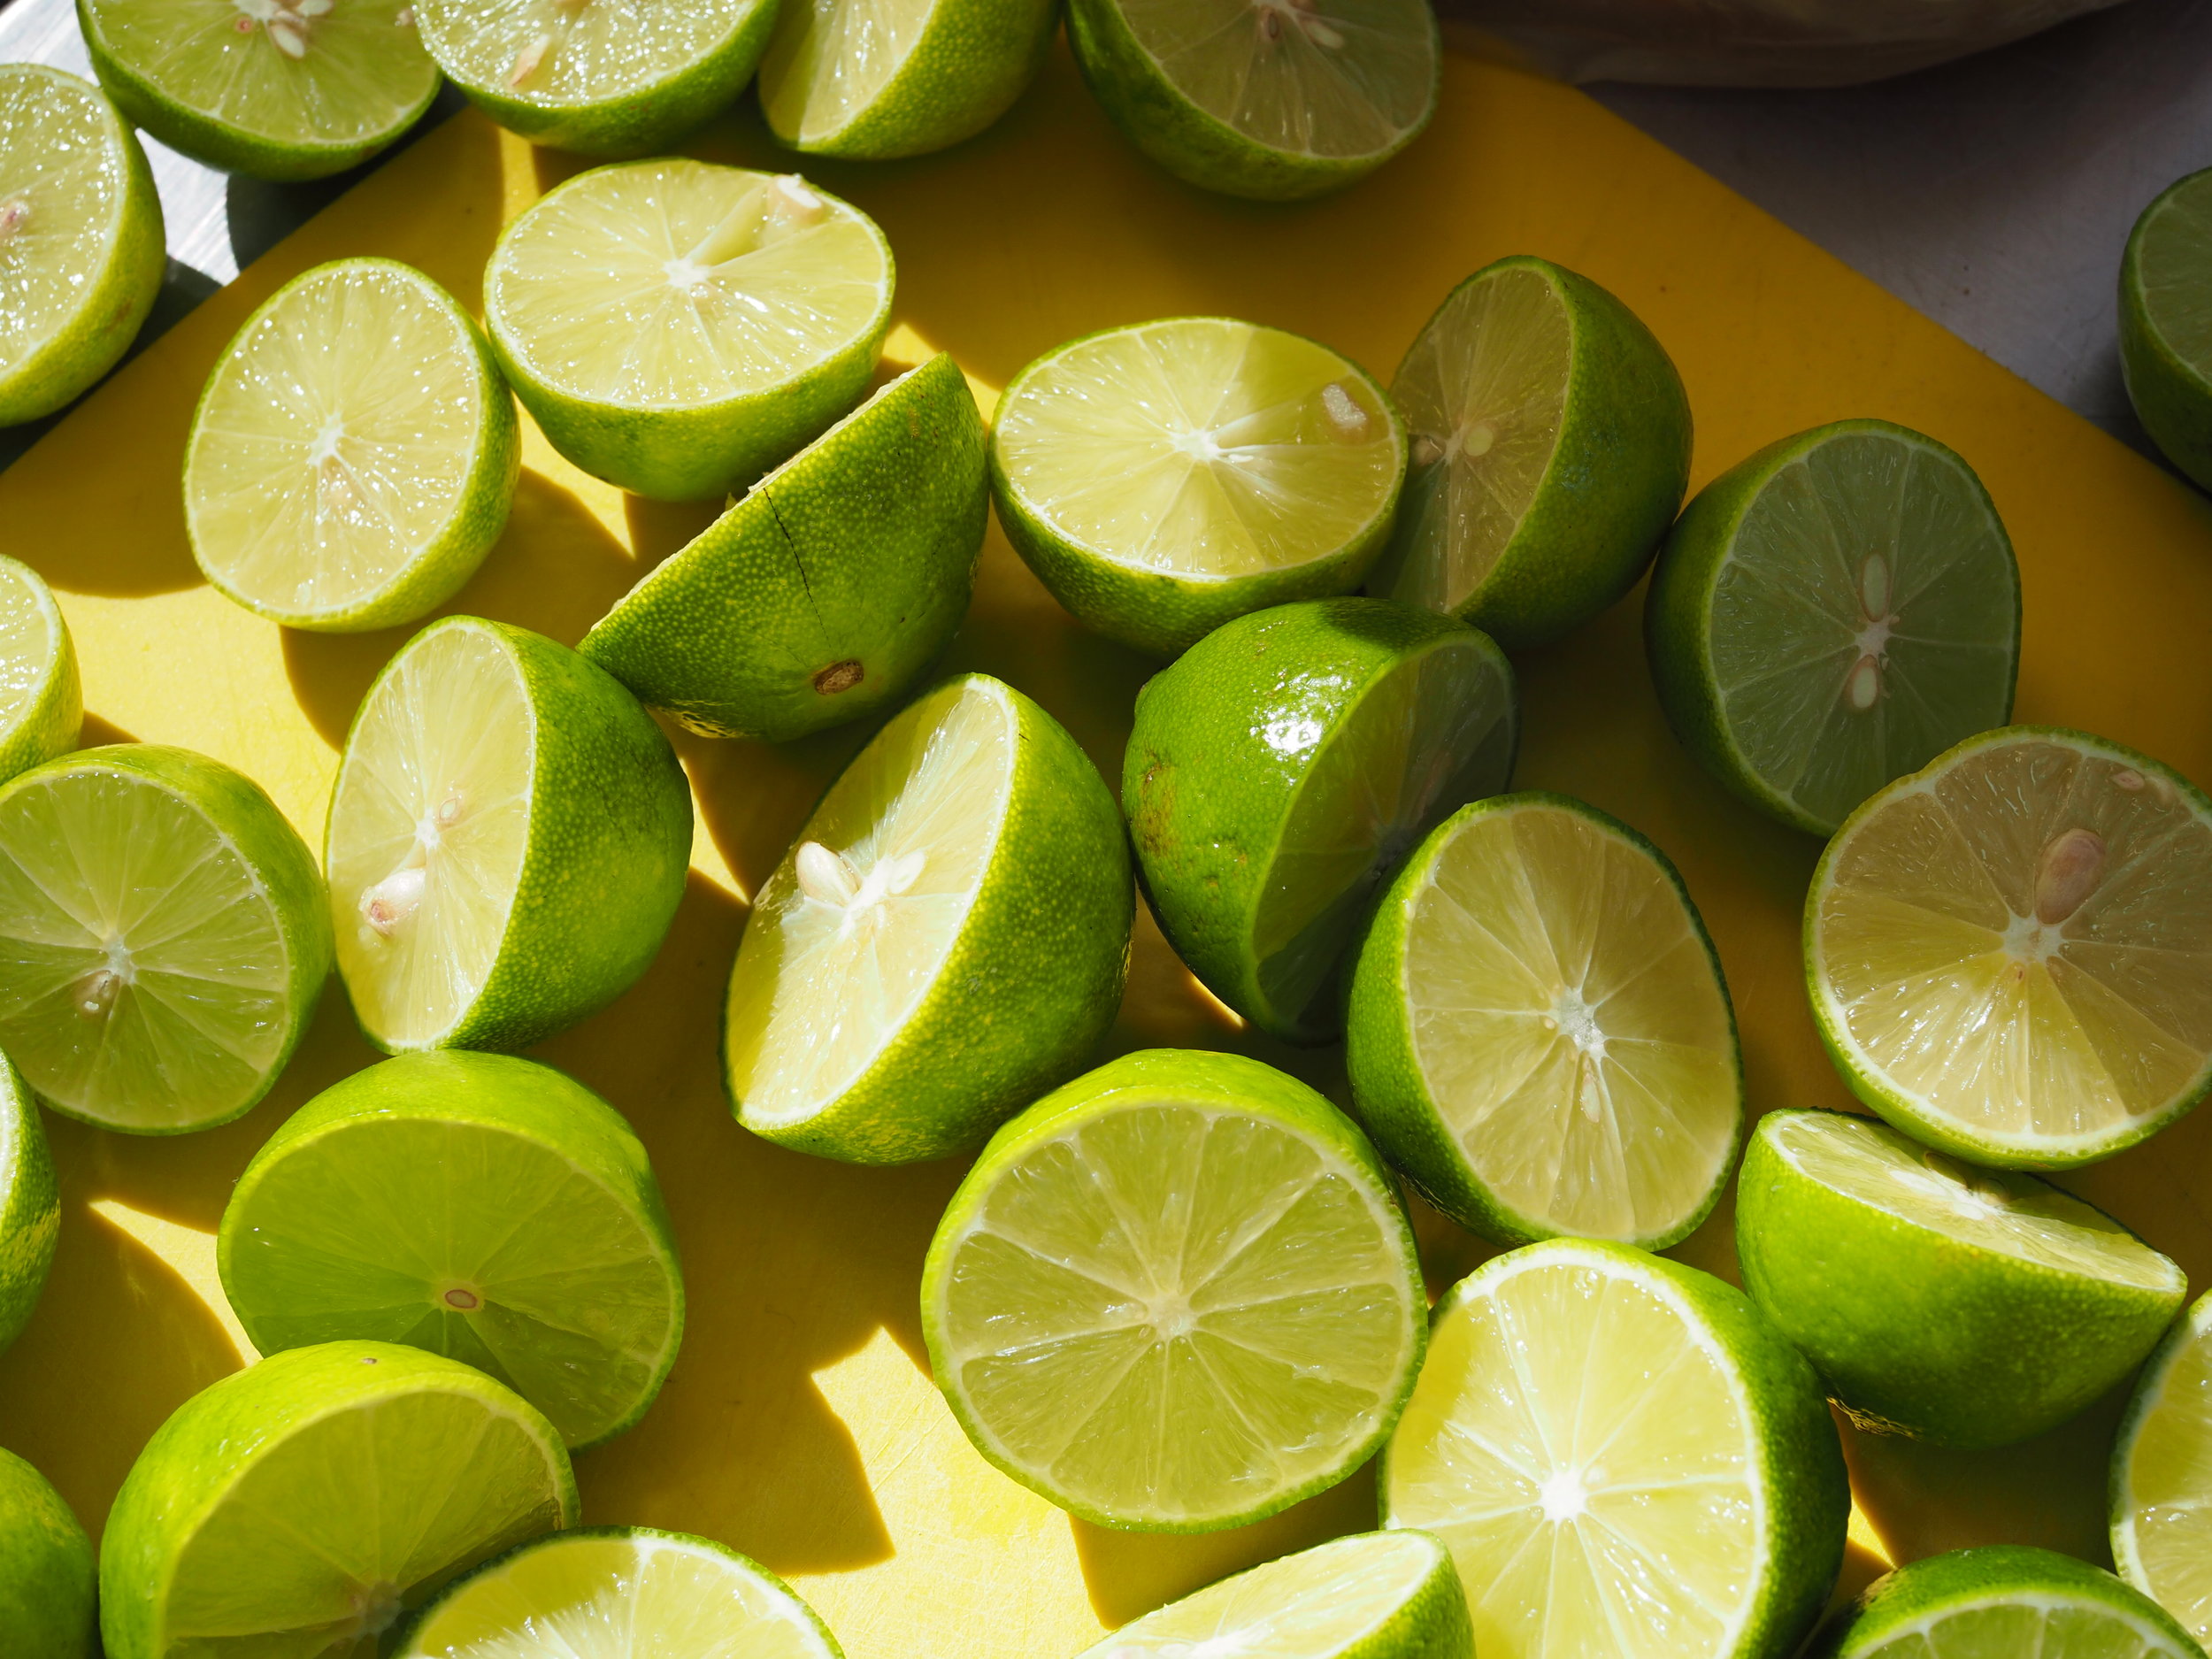 Lots and lots of limes